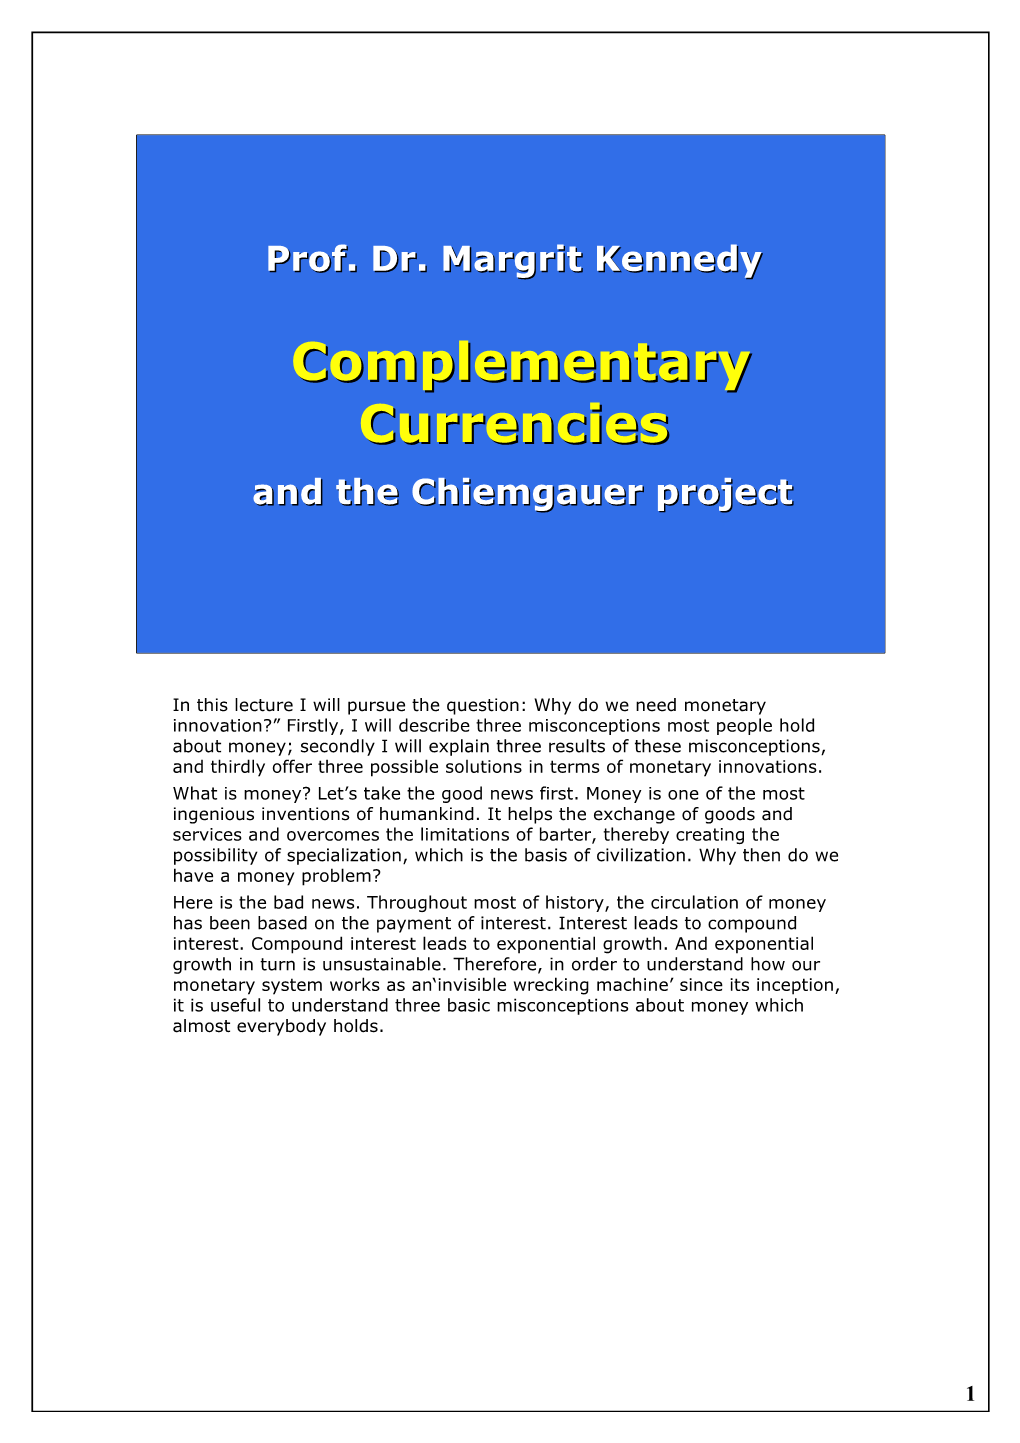 Complementary Currenciescurrencies and the Chiemgauer Project